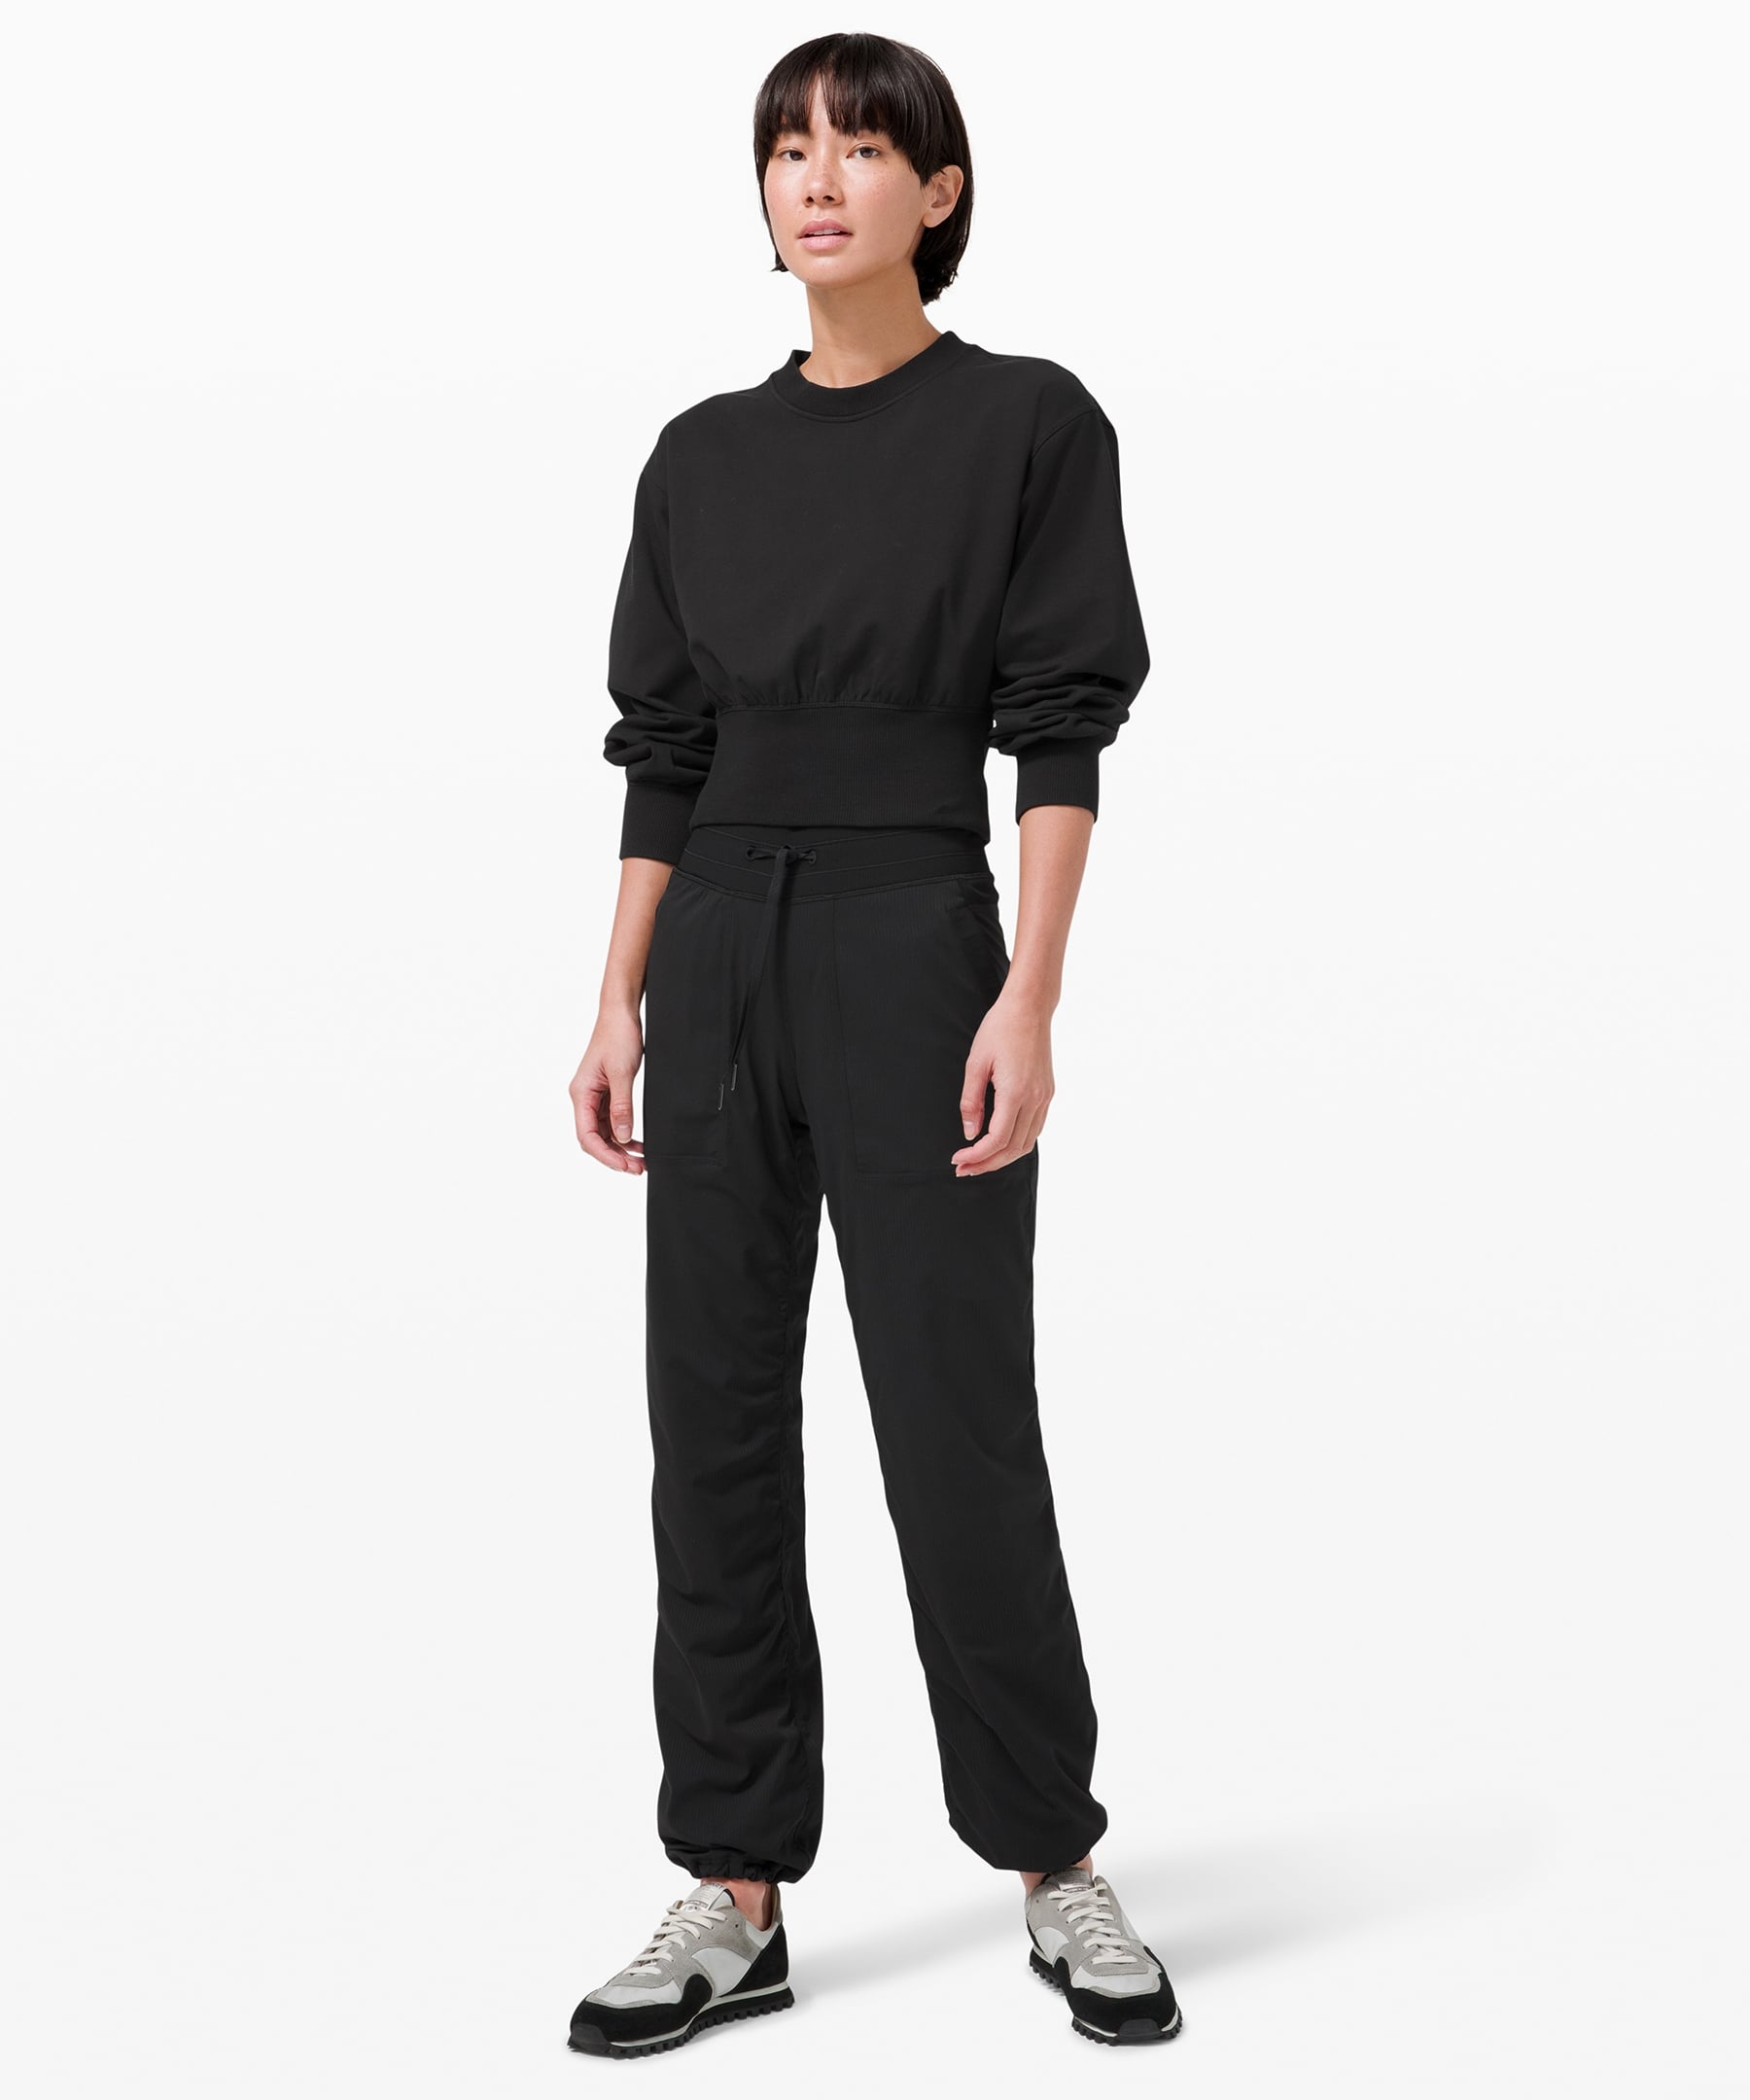 Lululemon Ribbed Contoured-Waist Crew and Keep Moving High Rise Full Length  Pant, 13 Matching Sets You Can Shop at Lululemon, Because Your Shades of  Black Should Match